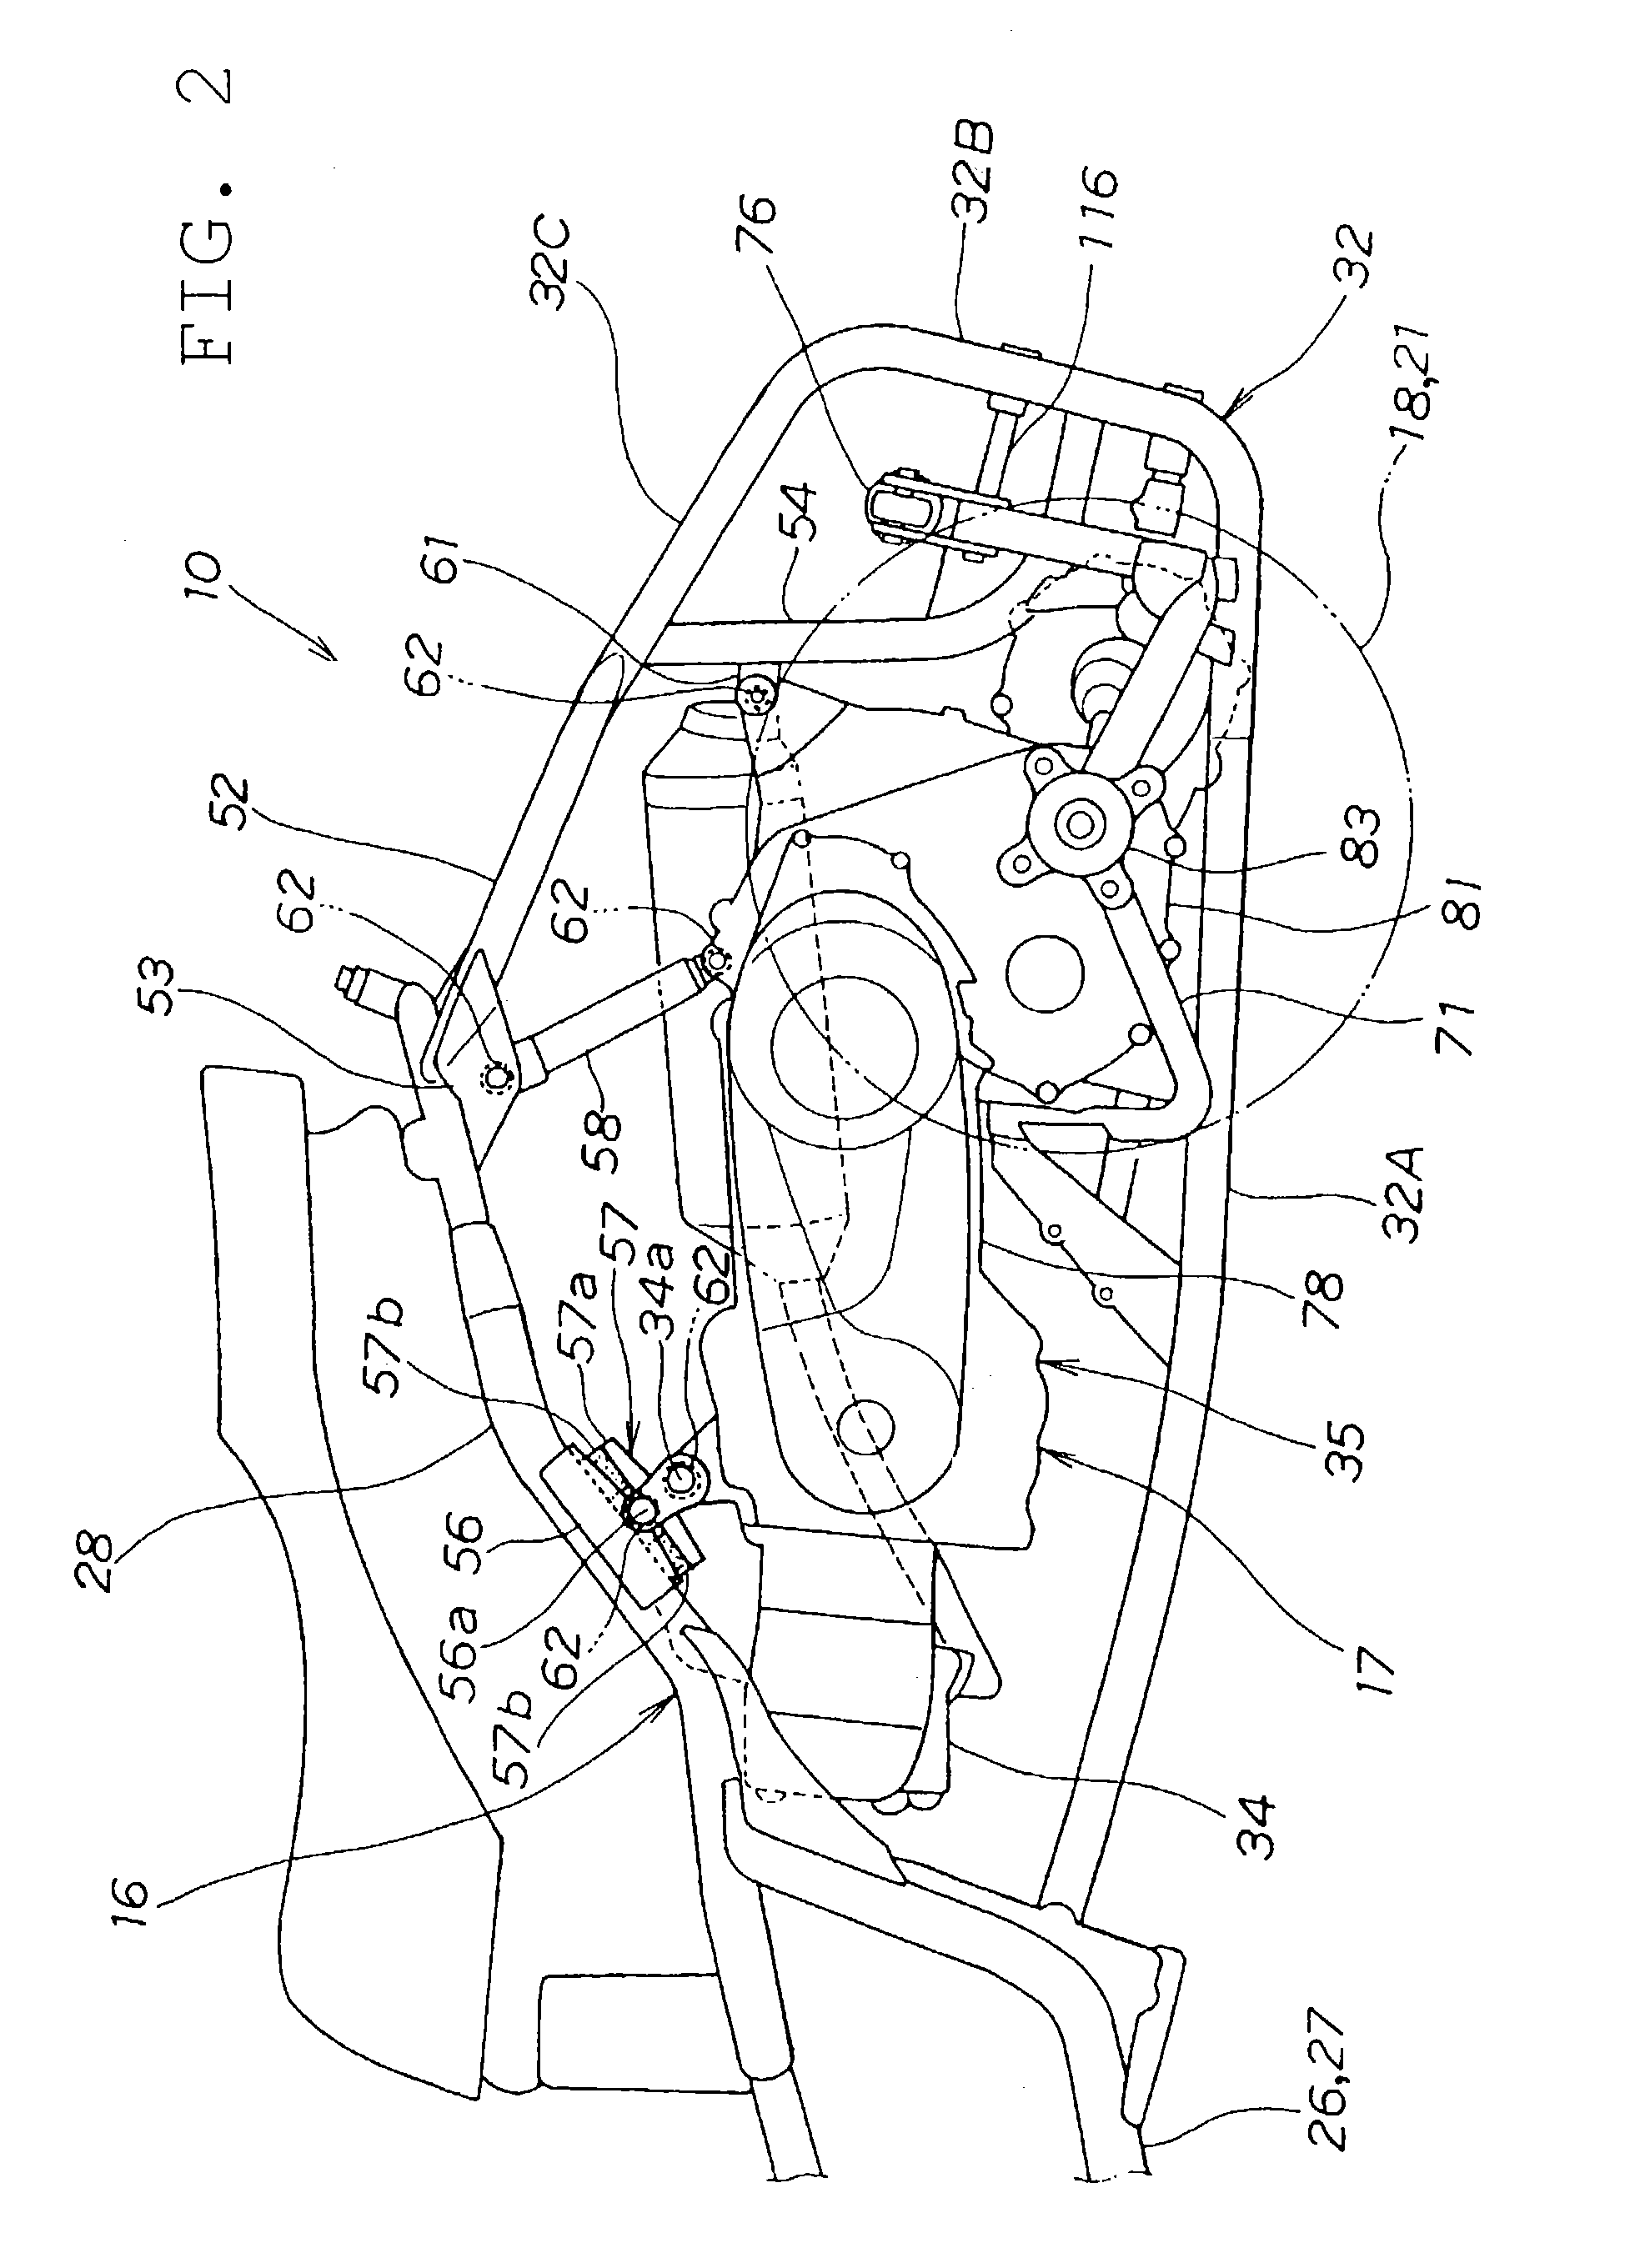 Motortricycle with oscillation mechanism